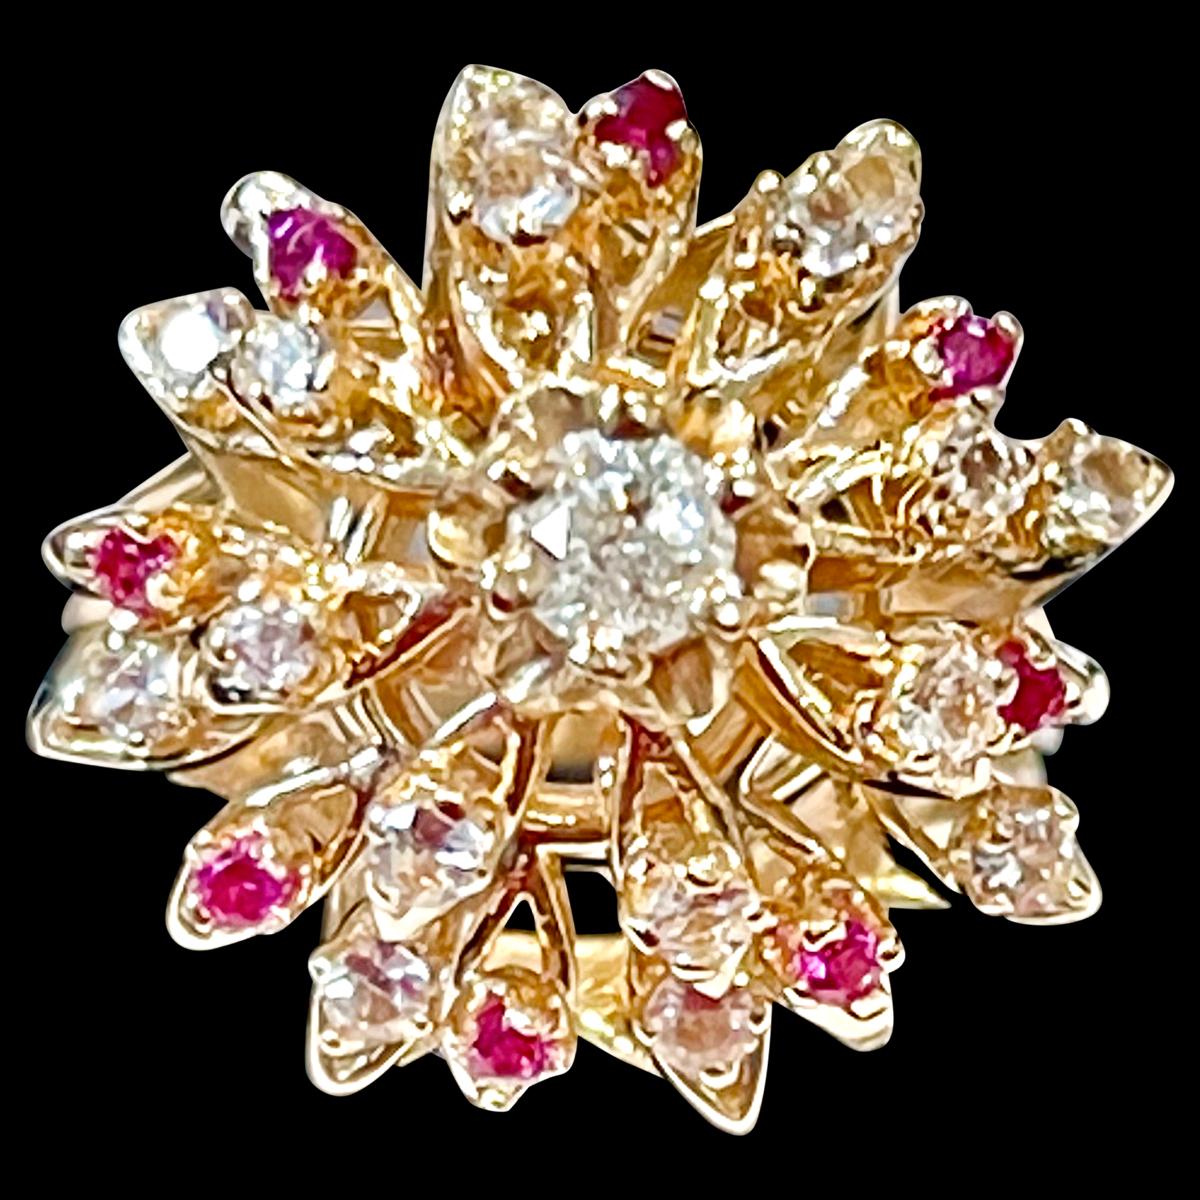 Natural Ruby and Diamond 14 Karat Yellow Gold  Flower Cocktail Ring Size 6.5
 Approximately 15 pointer diamond is making  the center of the flower which is surrounded by clean brilliant cut diamonds and rubies 
Ring Size 6.5 ( can be altered